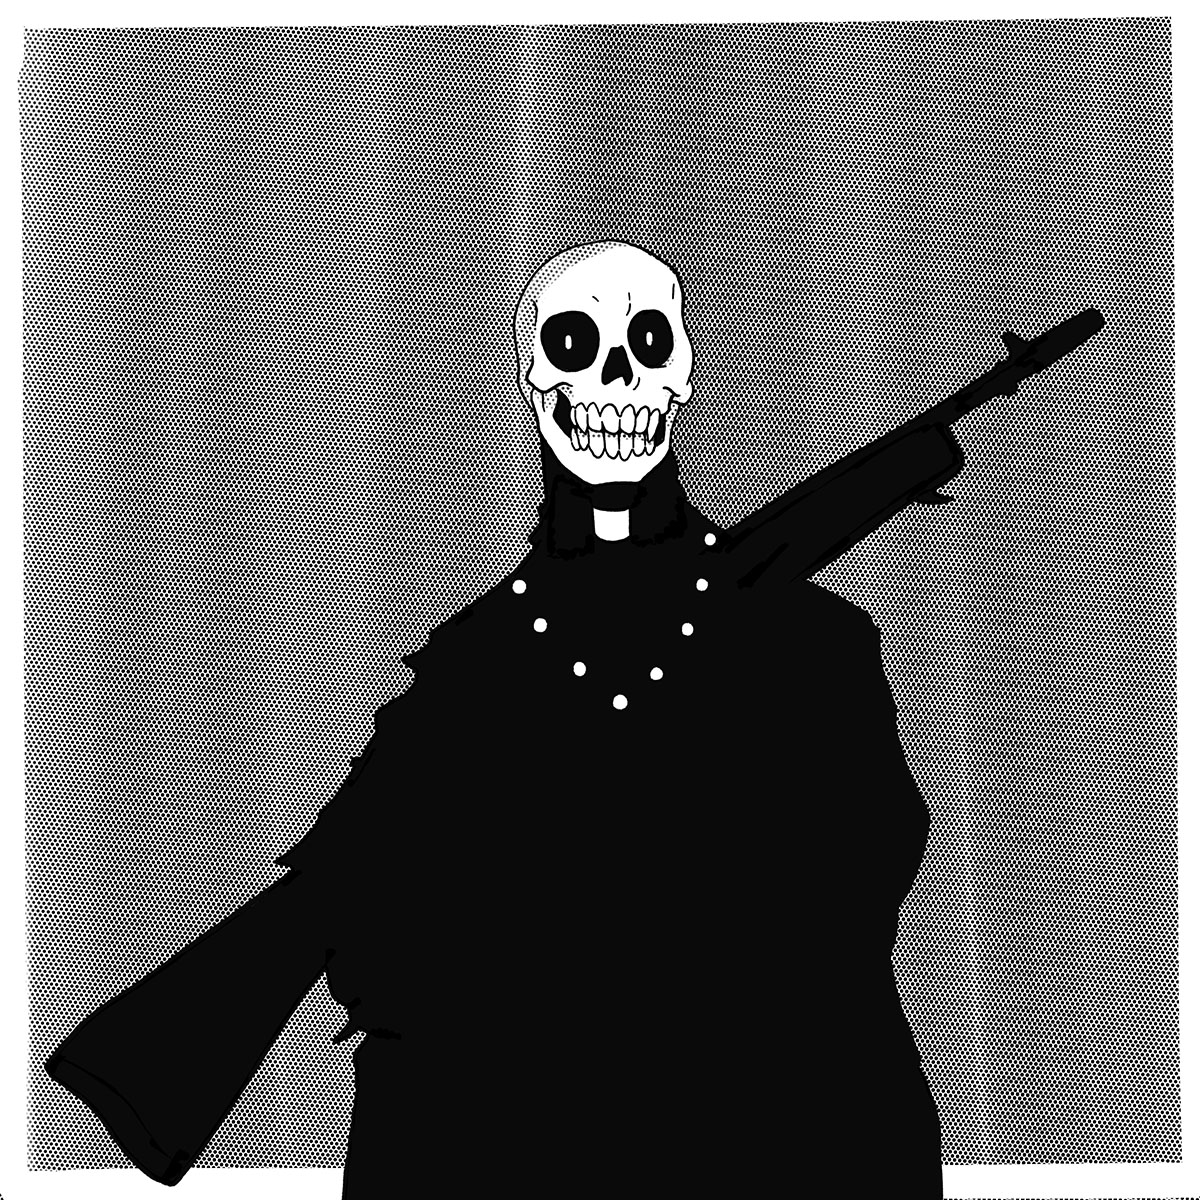 Graphic black and white image of skeleton figure with large gun